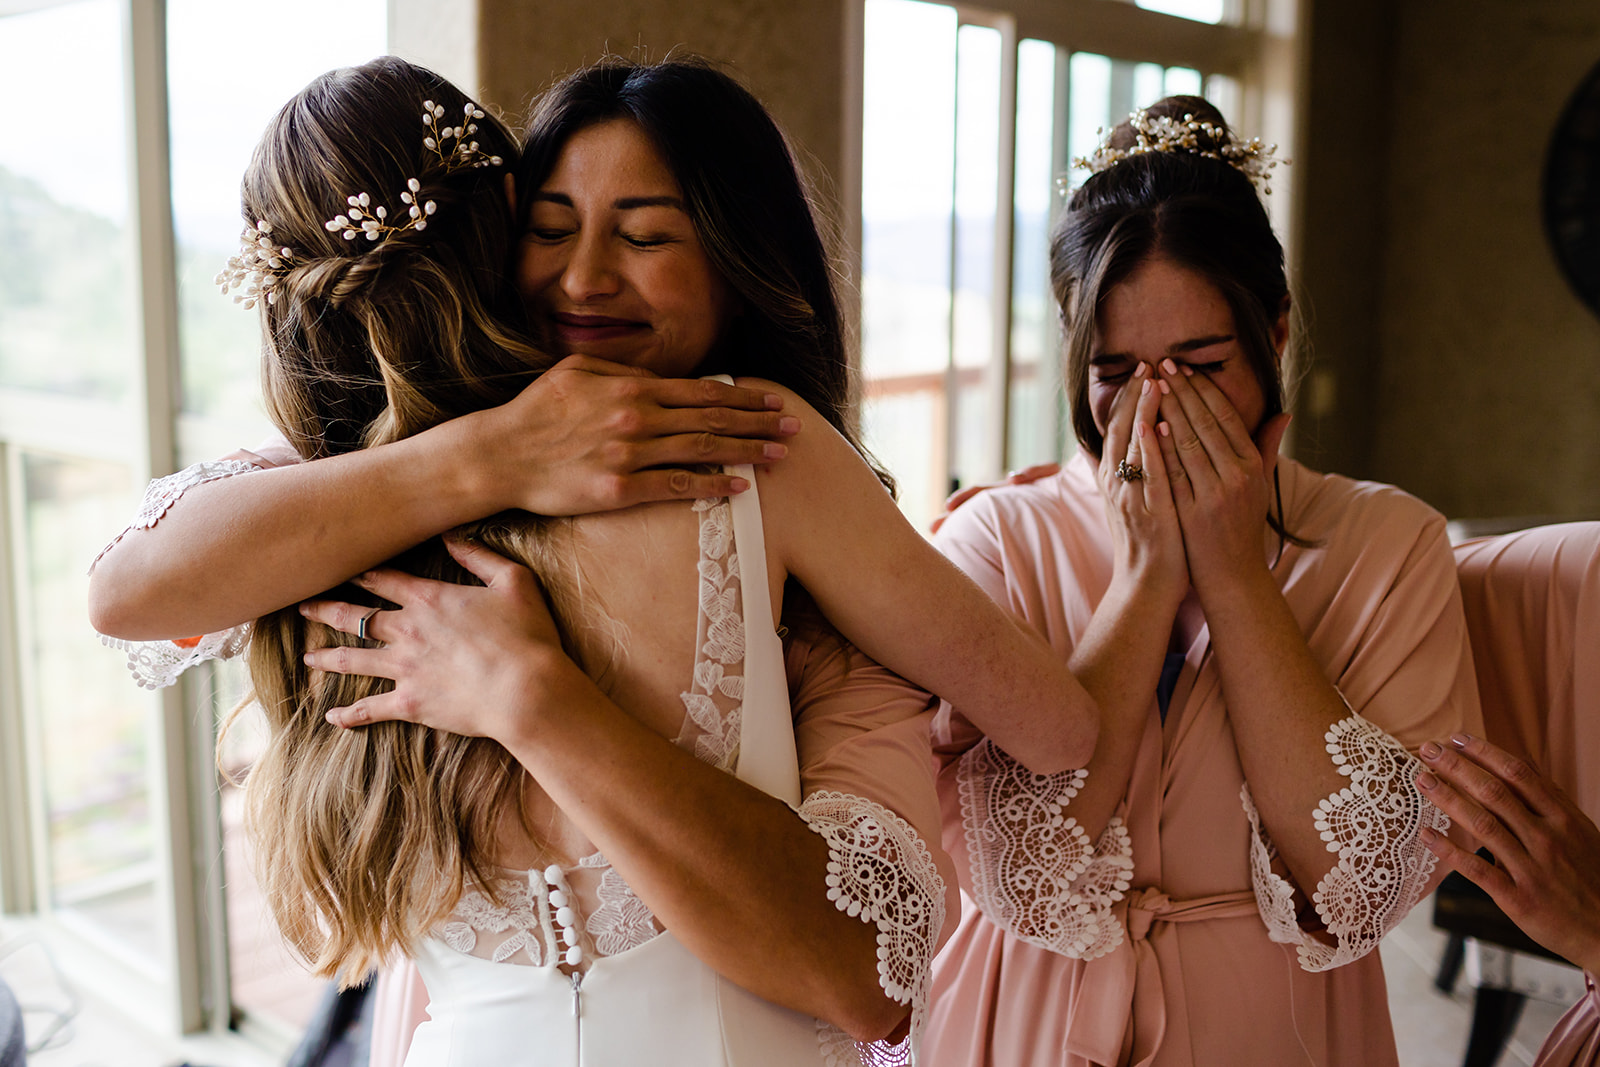 Bridesmaids get emotional and hug the bride when they see her fully dressed for the wedding.